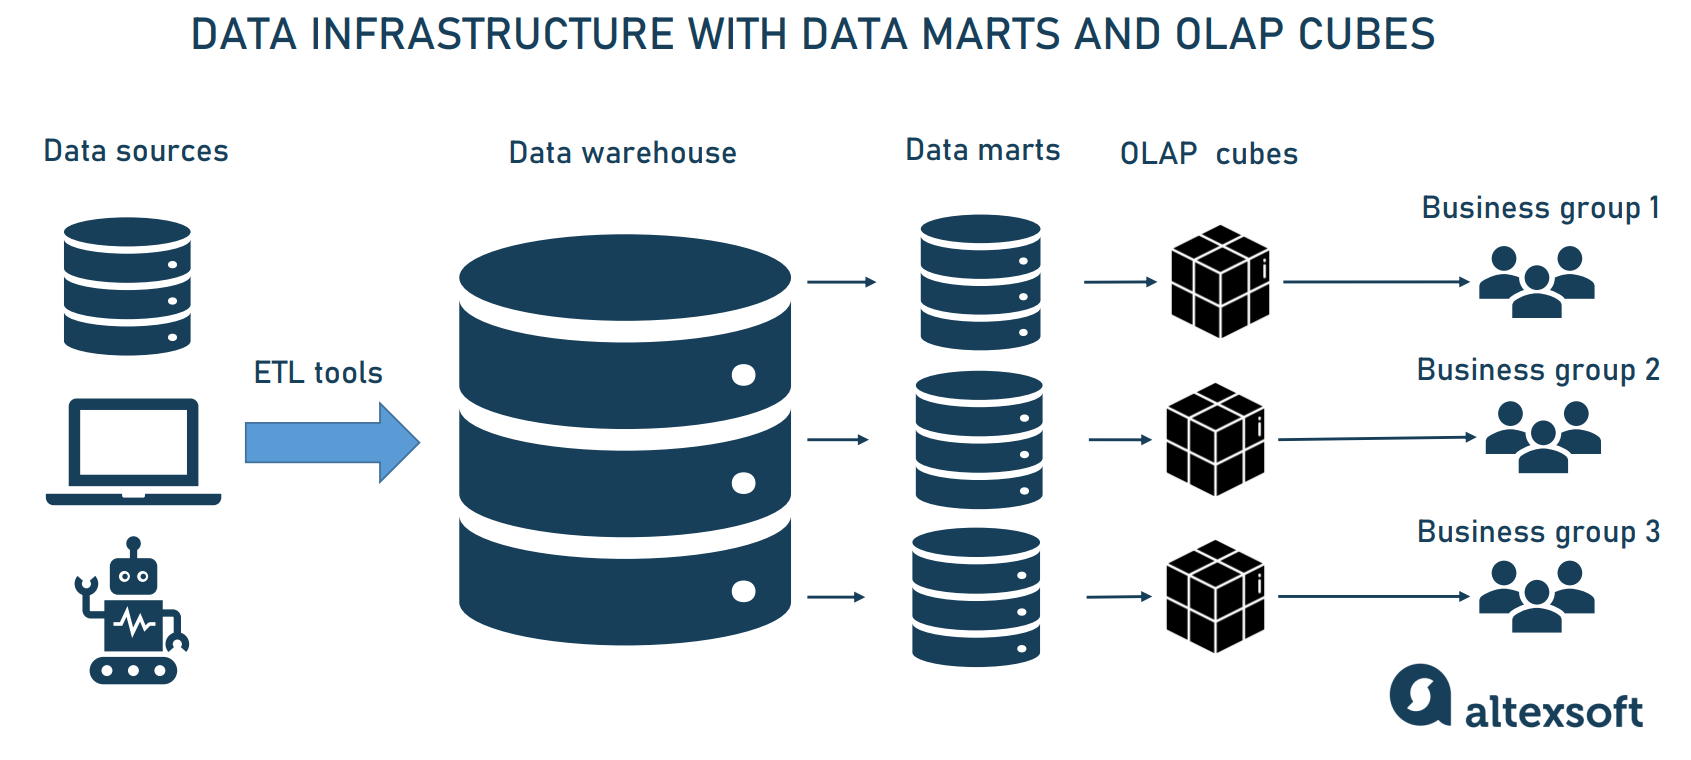 Data infrastructure with data marts and OLAP cubes. 